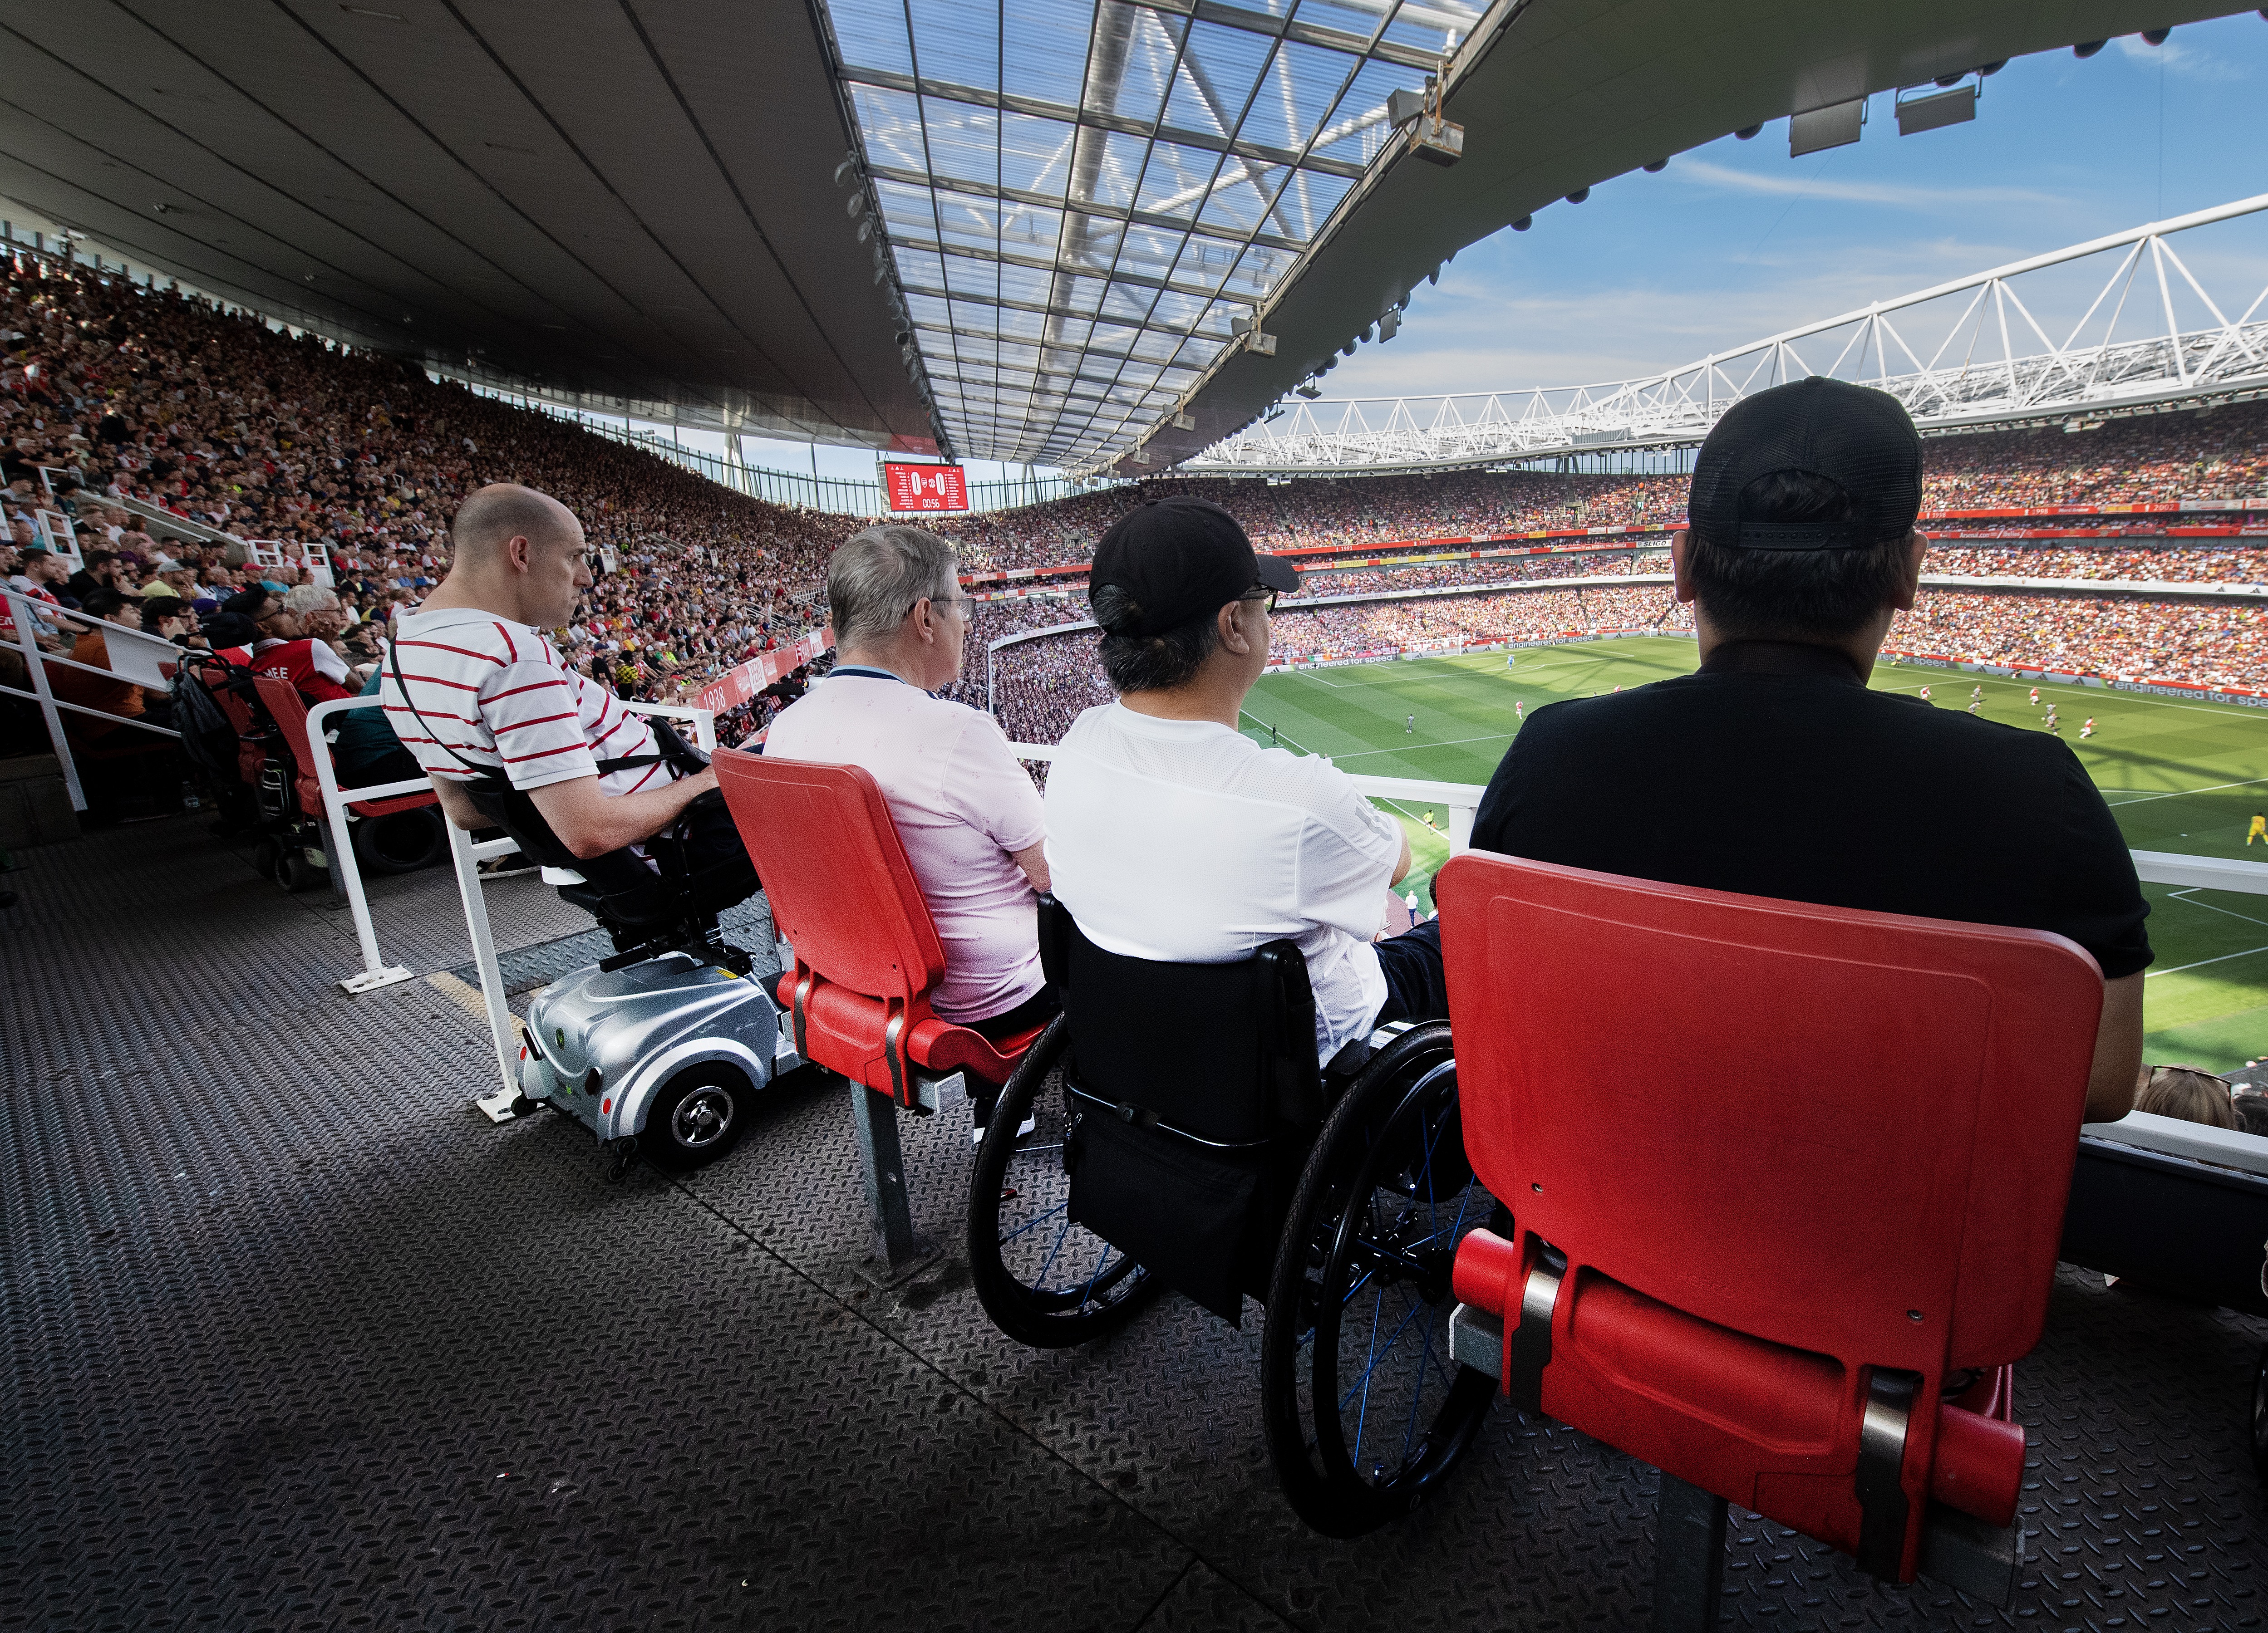 Image showing the view of the pitch from behind supporters on the wheelchair platform in the upper tier